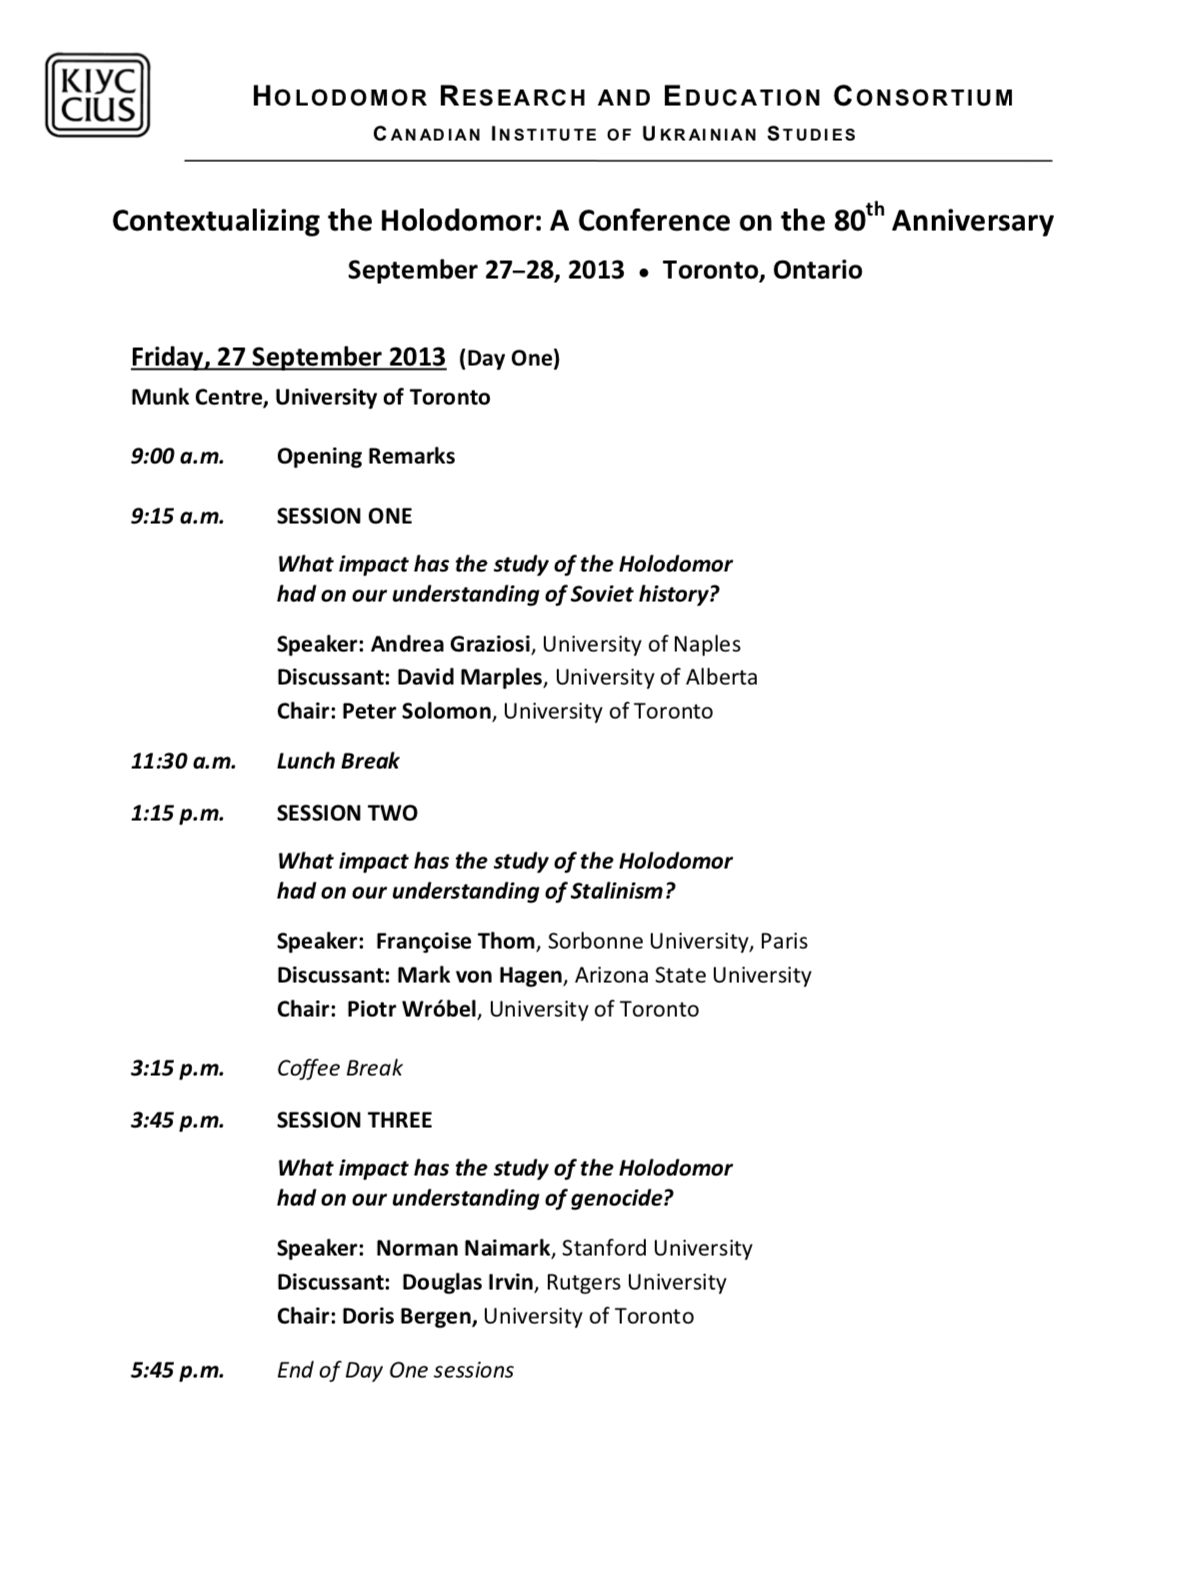 Contextualizing the Holodomor: A Conference on the 80th Anniversary of the 1932-1933 Famine in Ukraine